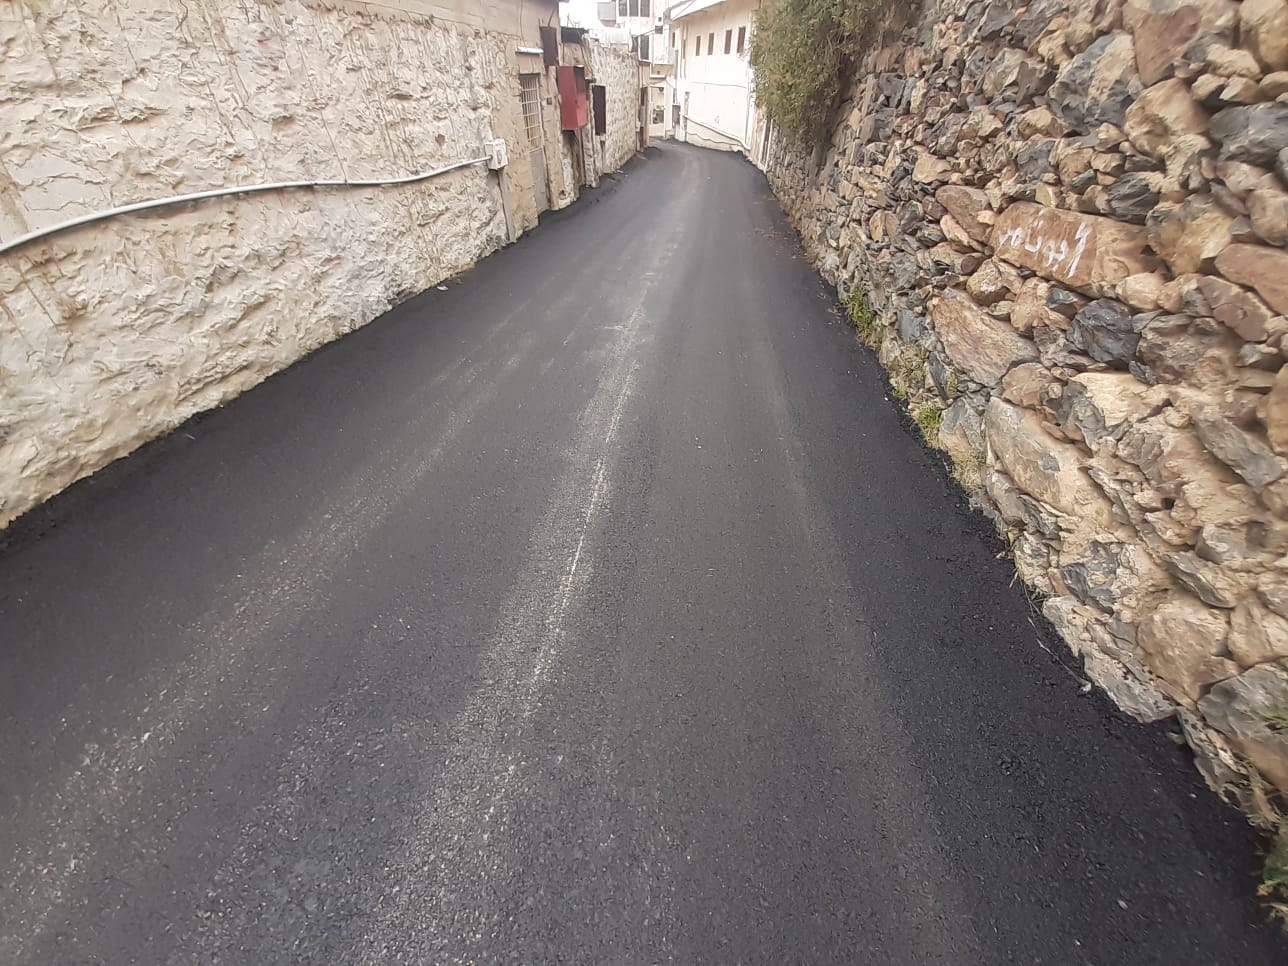 Asphalting, sidewalks and lighting for the municipality of Bani Hassan Governorate - the second phase